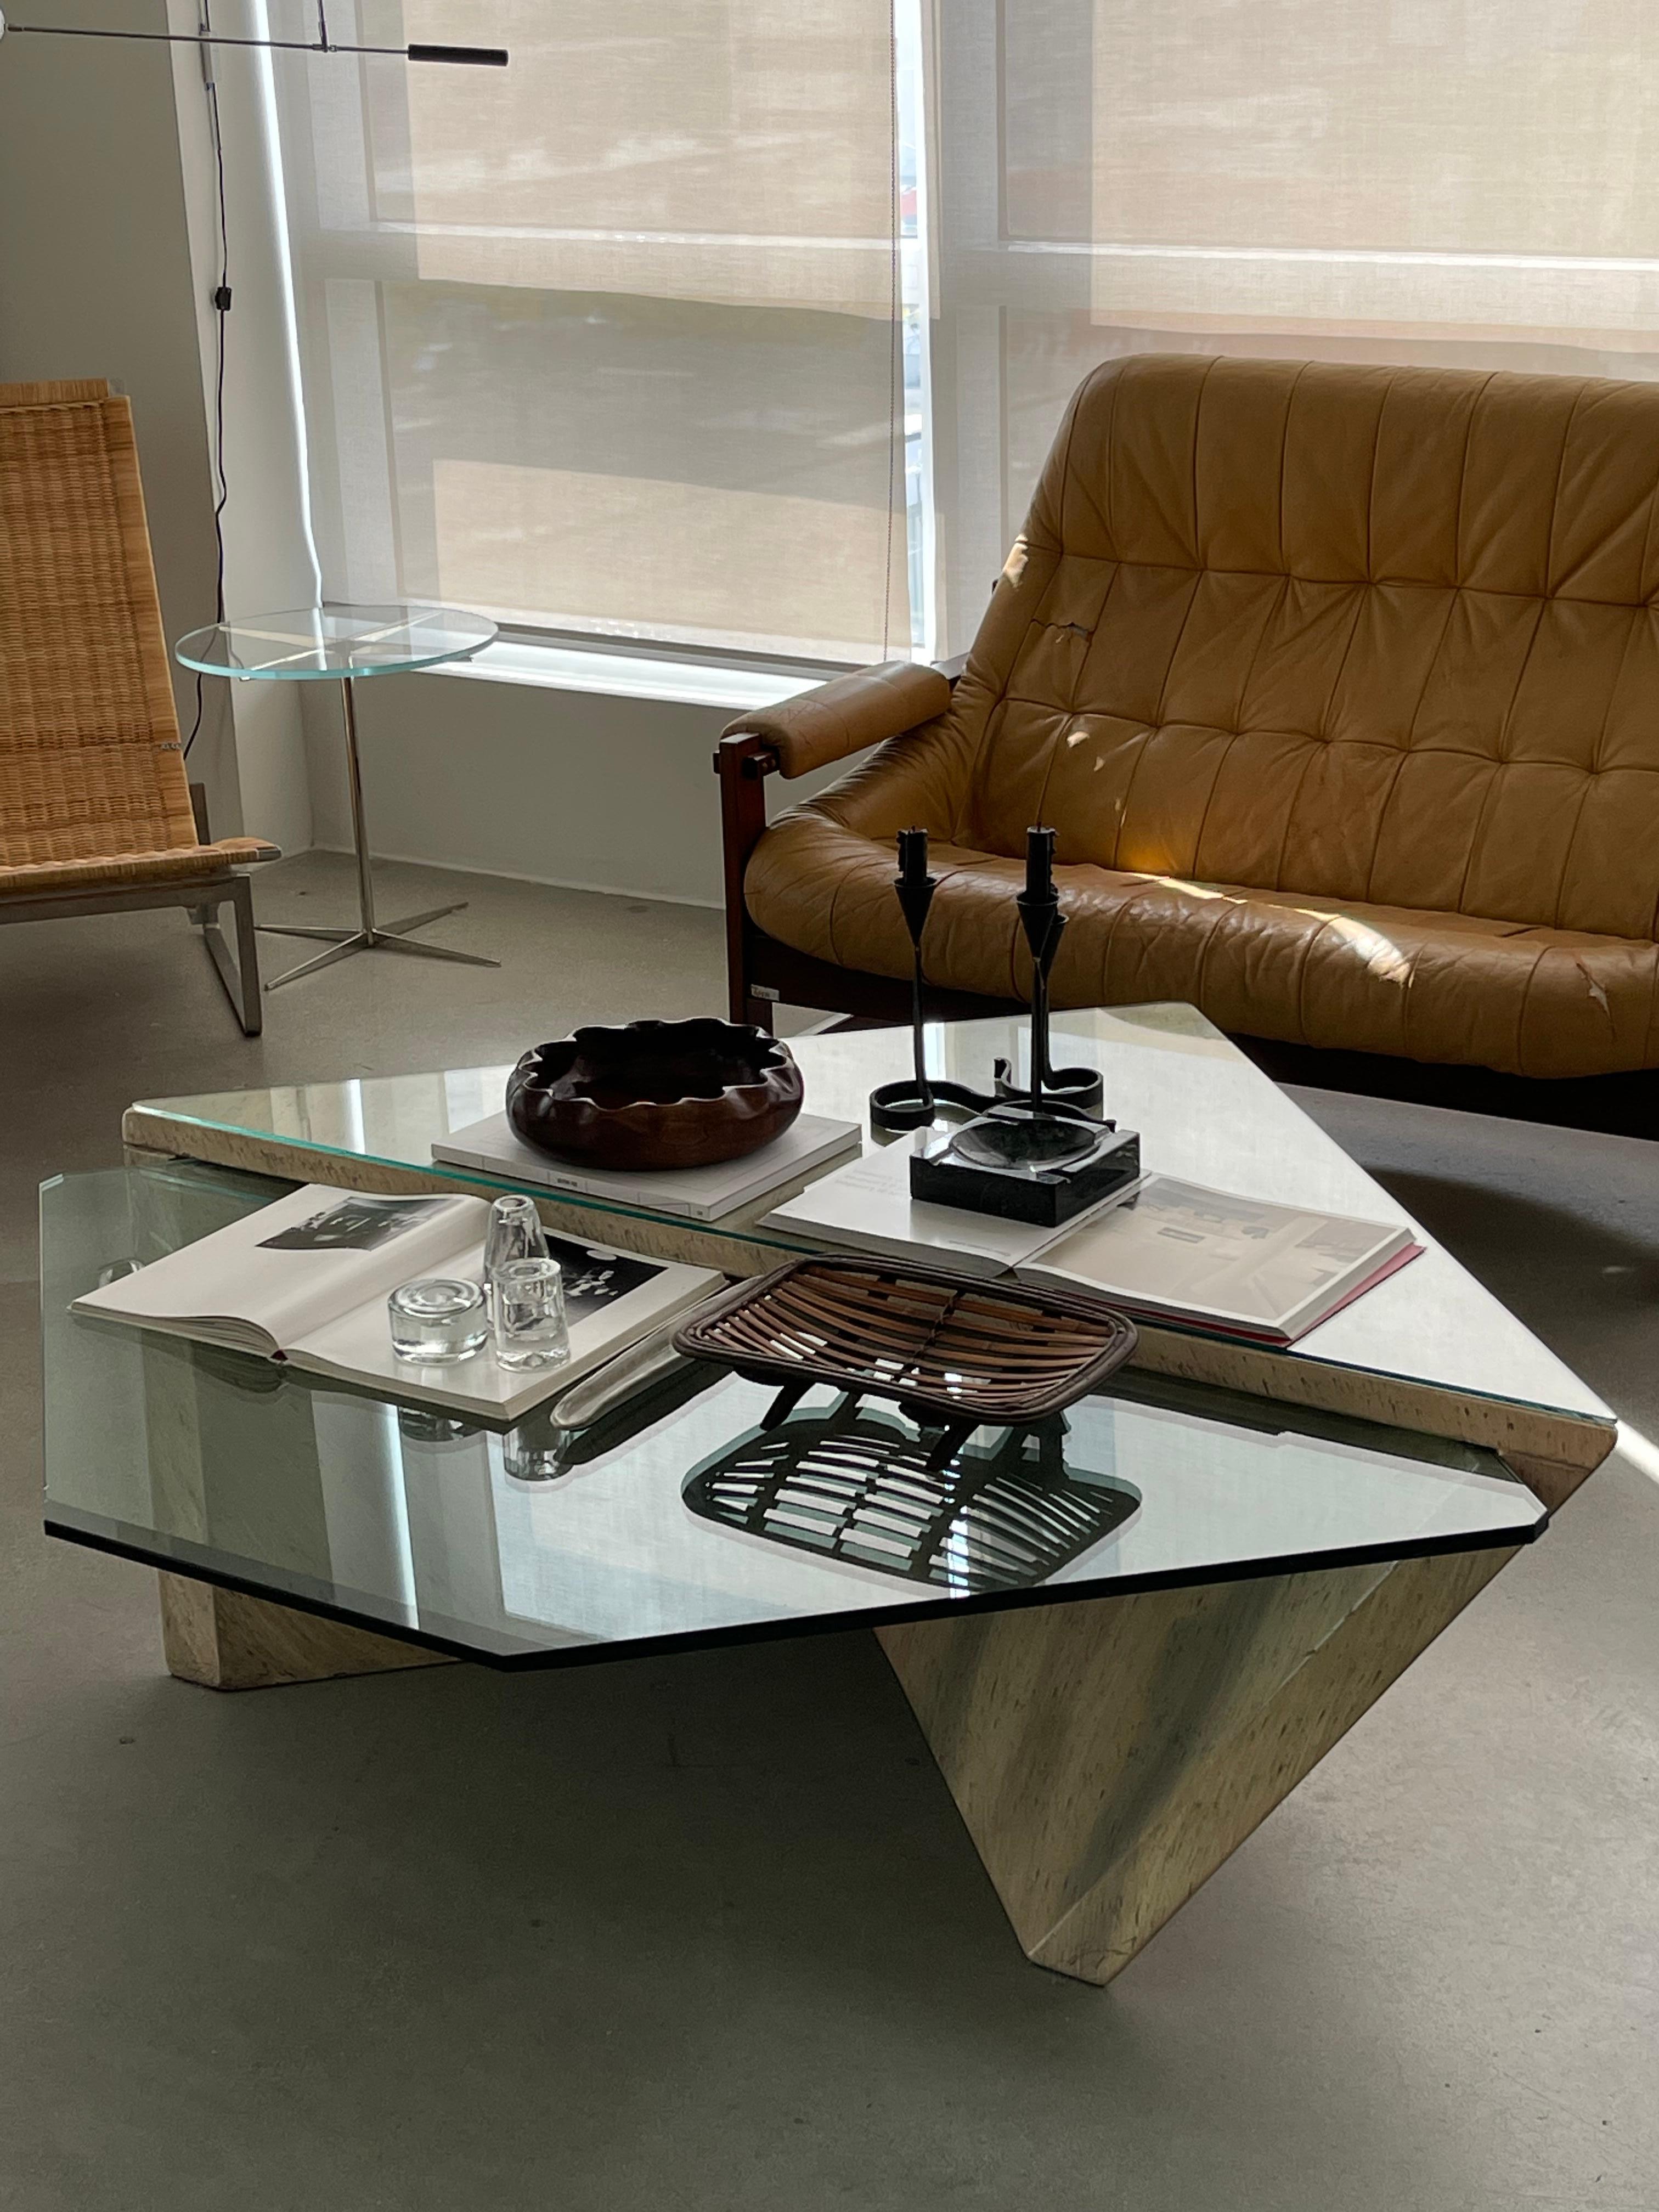 1970s Roger Rougier Post Modern Geometric Cantilever coffee table with a thick vintage glass insert, triangular glass top and a lacquered base. Total of 3 pieces that come together to create this unique floating glass design. Small chipped area of